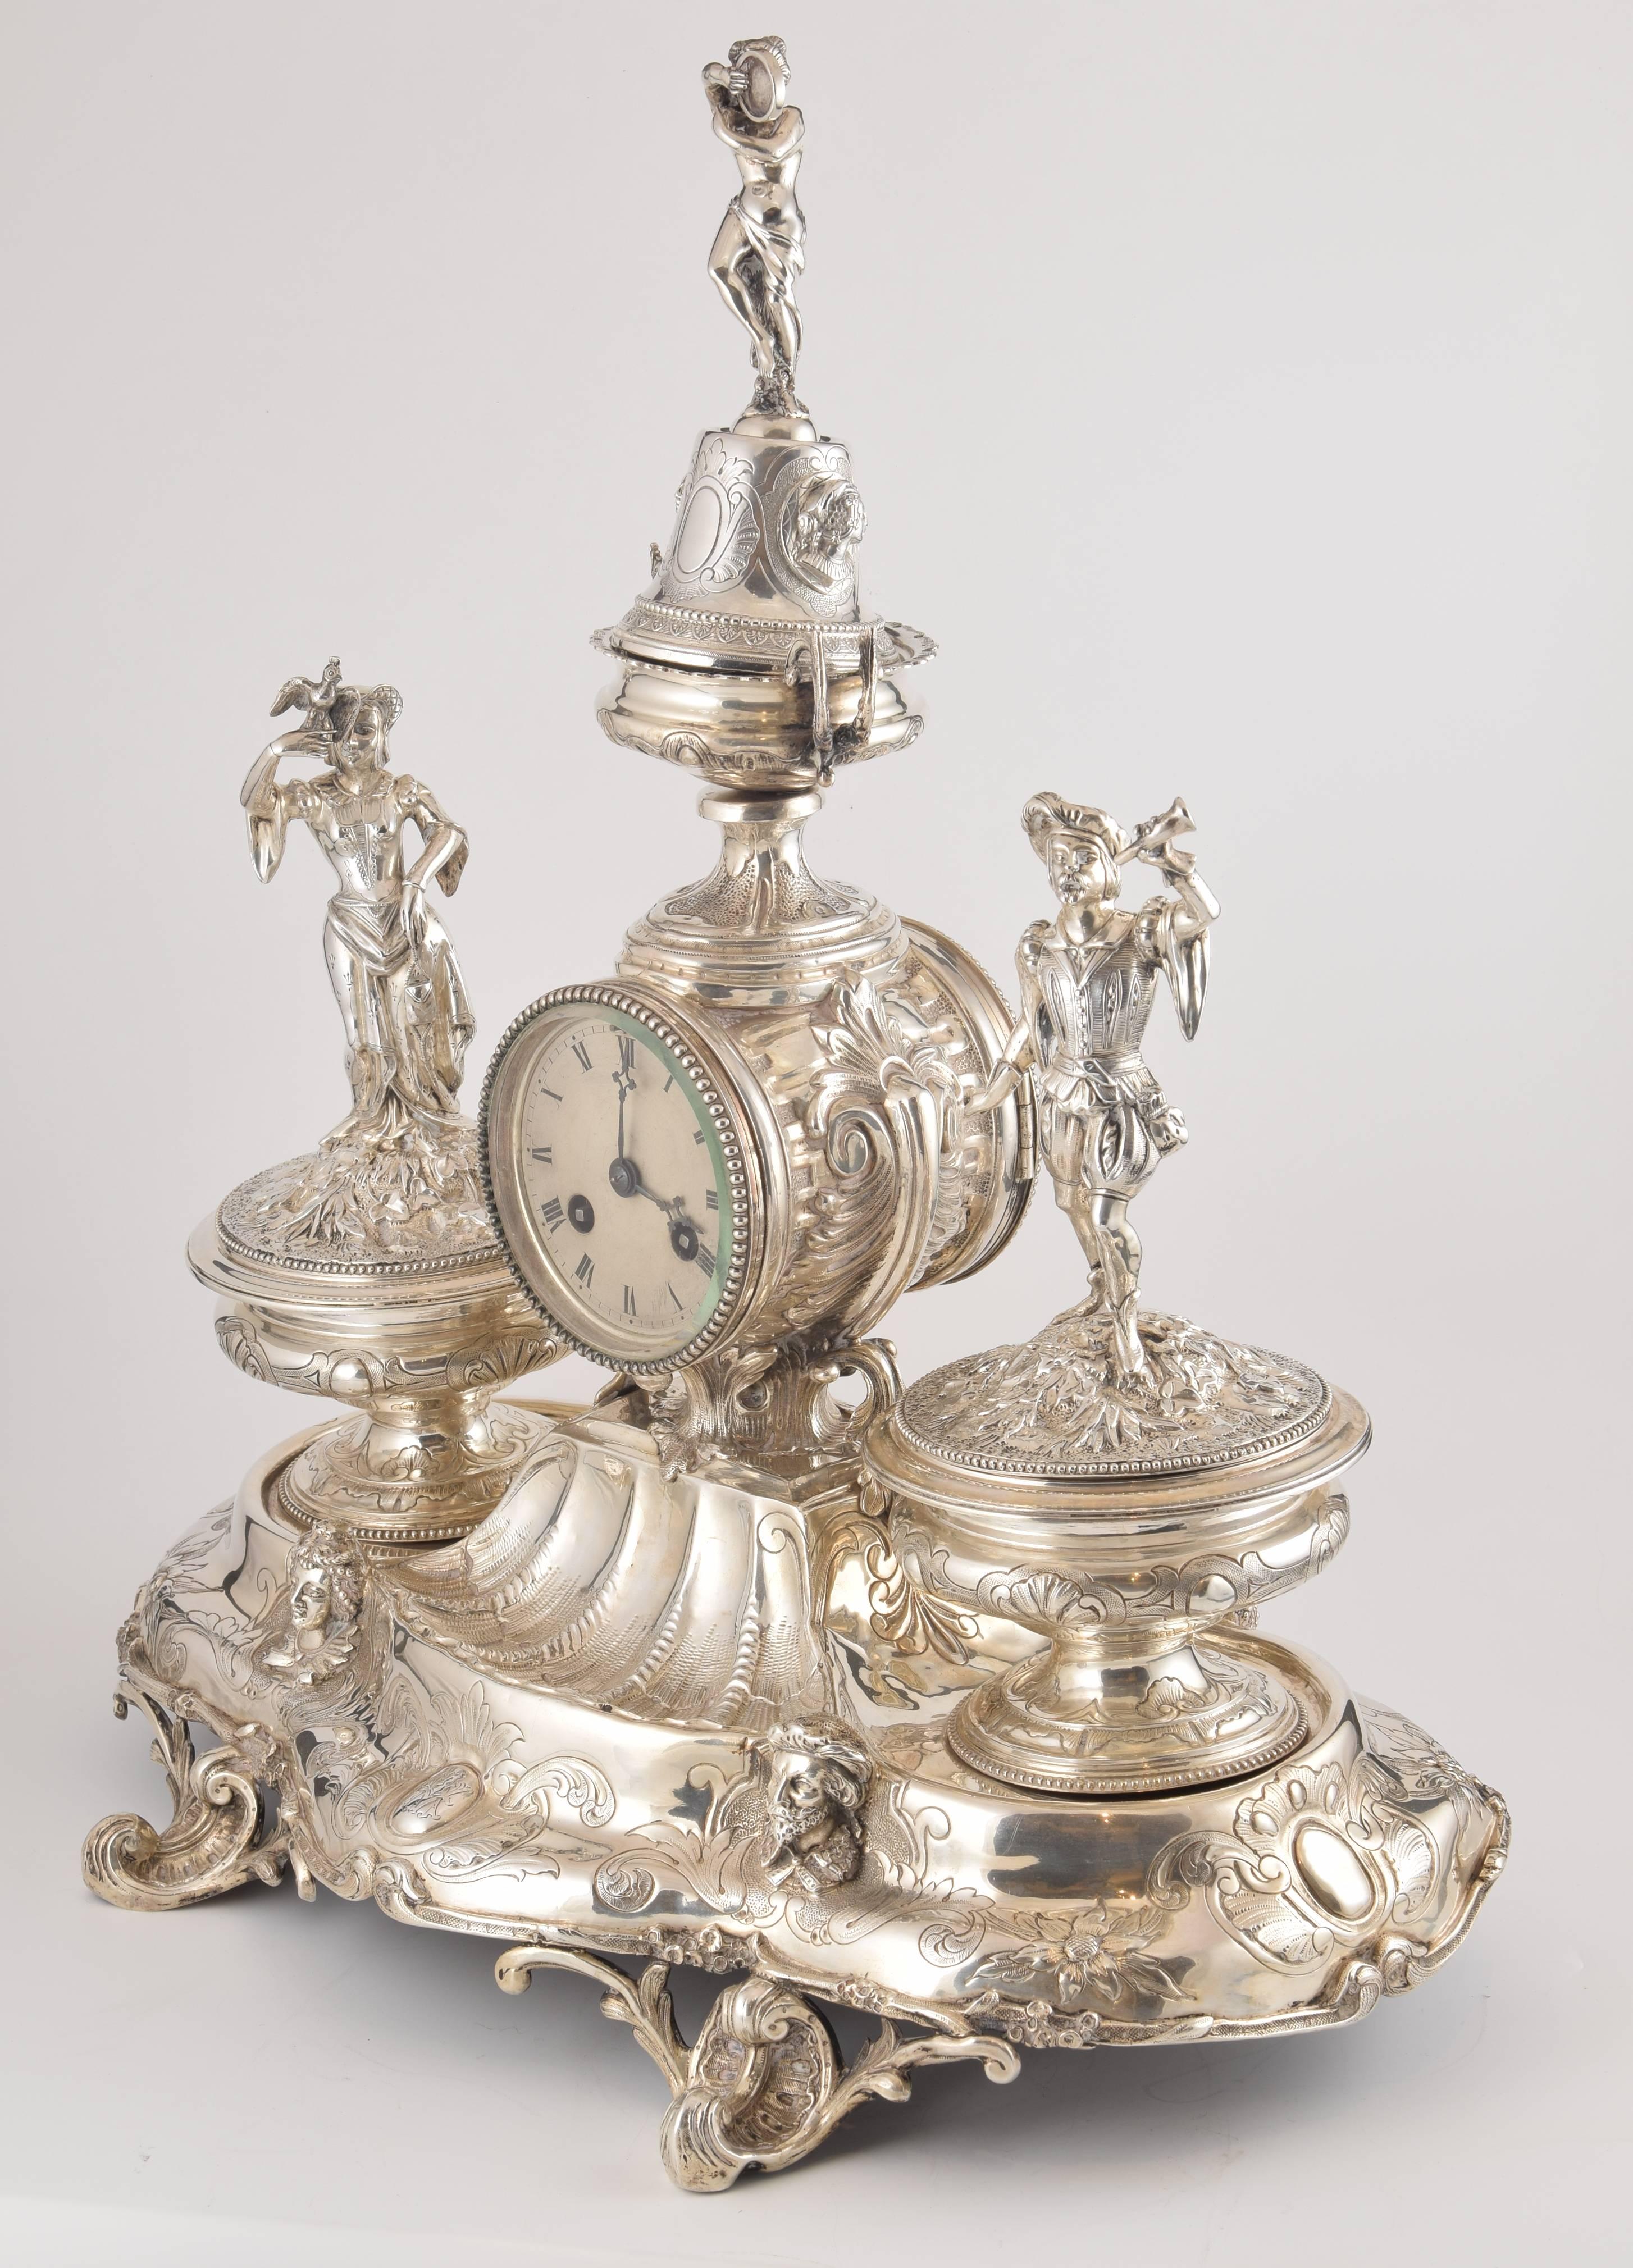 Rococo Revival Solid Silver Writing Set with Clock, France, 19th Century with Hallmarks